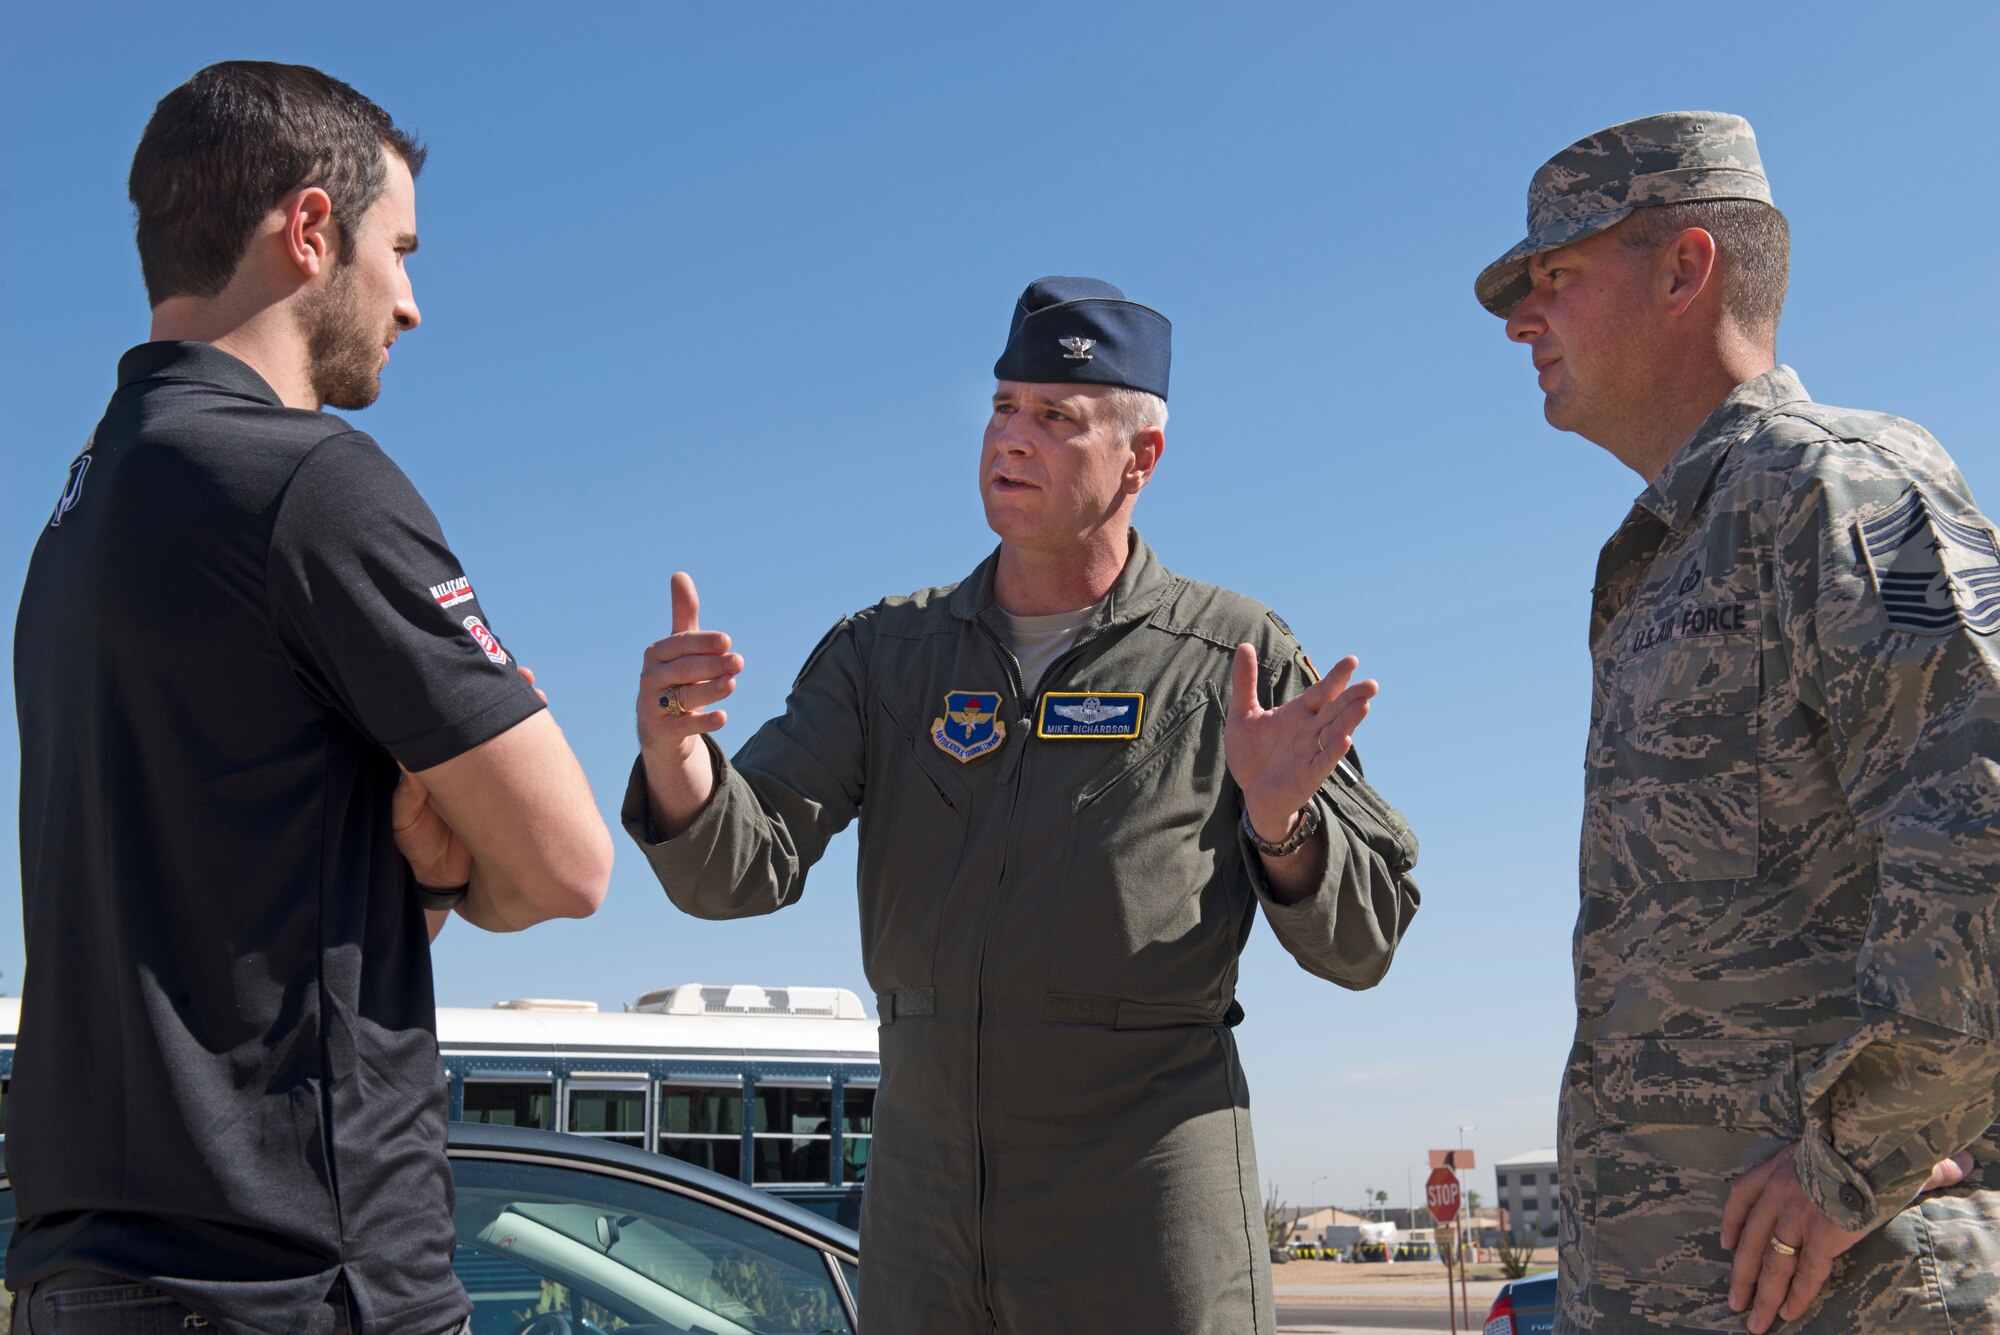 Alexander Rossi, Andretti Autosport racecar driver; Col. Michael Richardson, 56th Fighter Wing vice commander; and Chief Master Sgt. Randy Kwiatkowski, 56th Fighter Wing command chief, talk about aspects of the wing’s mission at Luke Air Force Base, Ariz., April 5, 2018. Rossi visited Luke as part of a small delegation from Andretti Autosport in order to learn about the base and its Airmen. (U.S. Air Force photo by Senior Airman Ridge Shan)